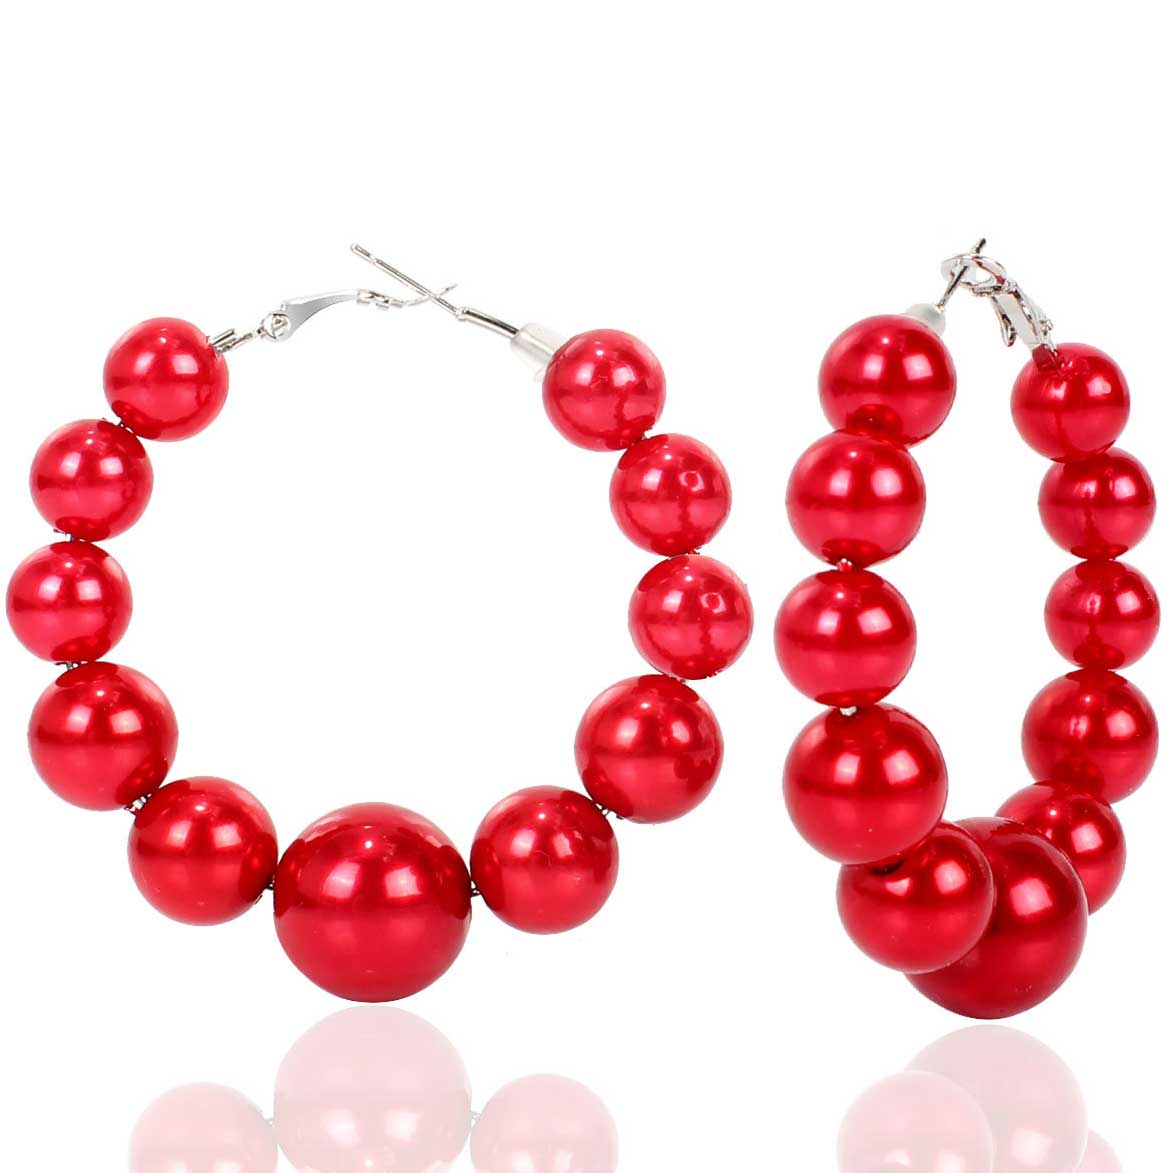 1 Pair Round Red Faux Pearls Plastic Earrings